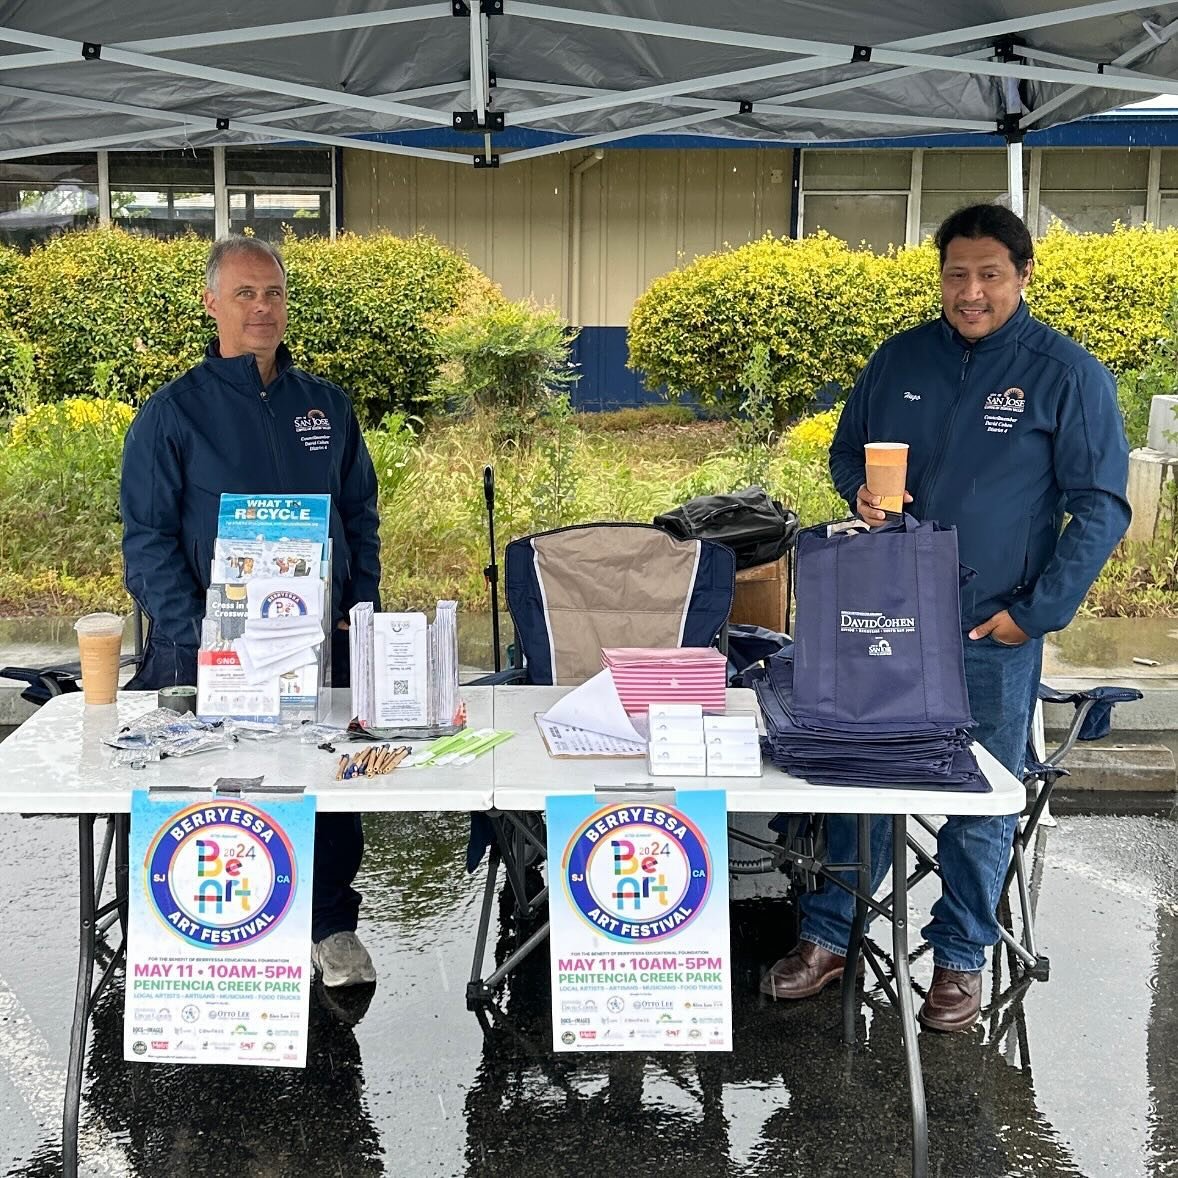 Rain or shine, the Berryessa Farmers Market is back! Excited to be having office hours here today, embracing the wet weather and supporting local vendors. Nice to see everyone who stopped by for some fresh produce and a chat! #BerryessaFarmersMarket 